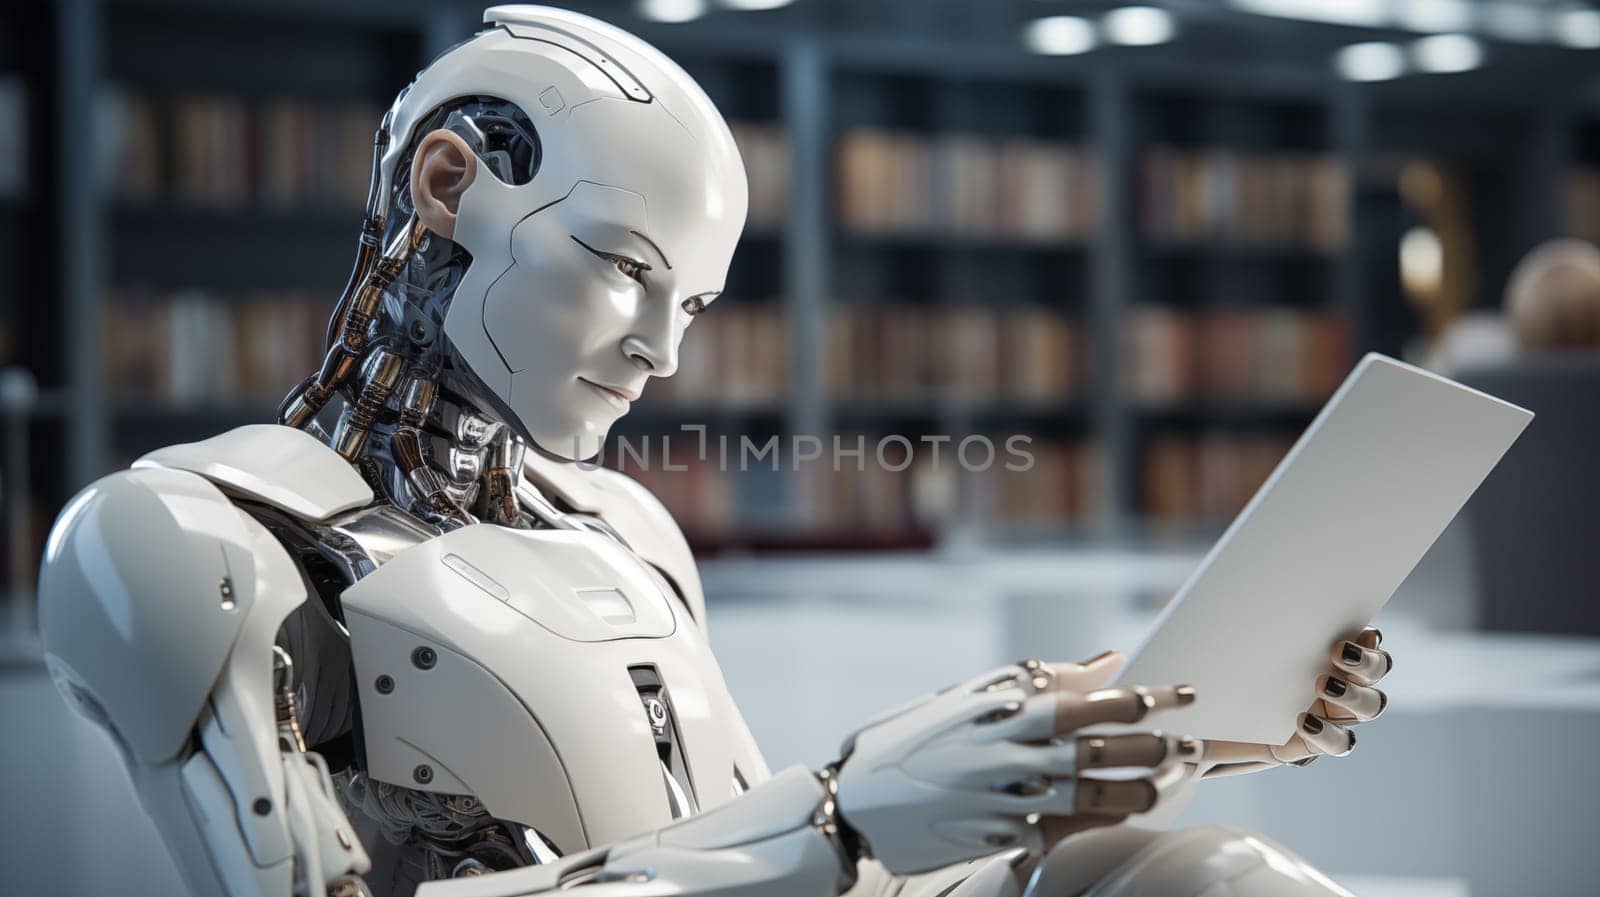 A robot with human-like facial features intently reads a document, showcasing a blend of advanced AI and human traits.